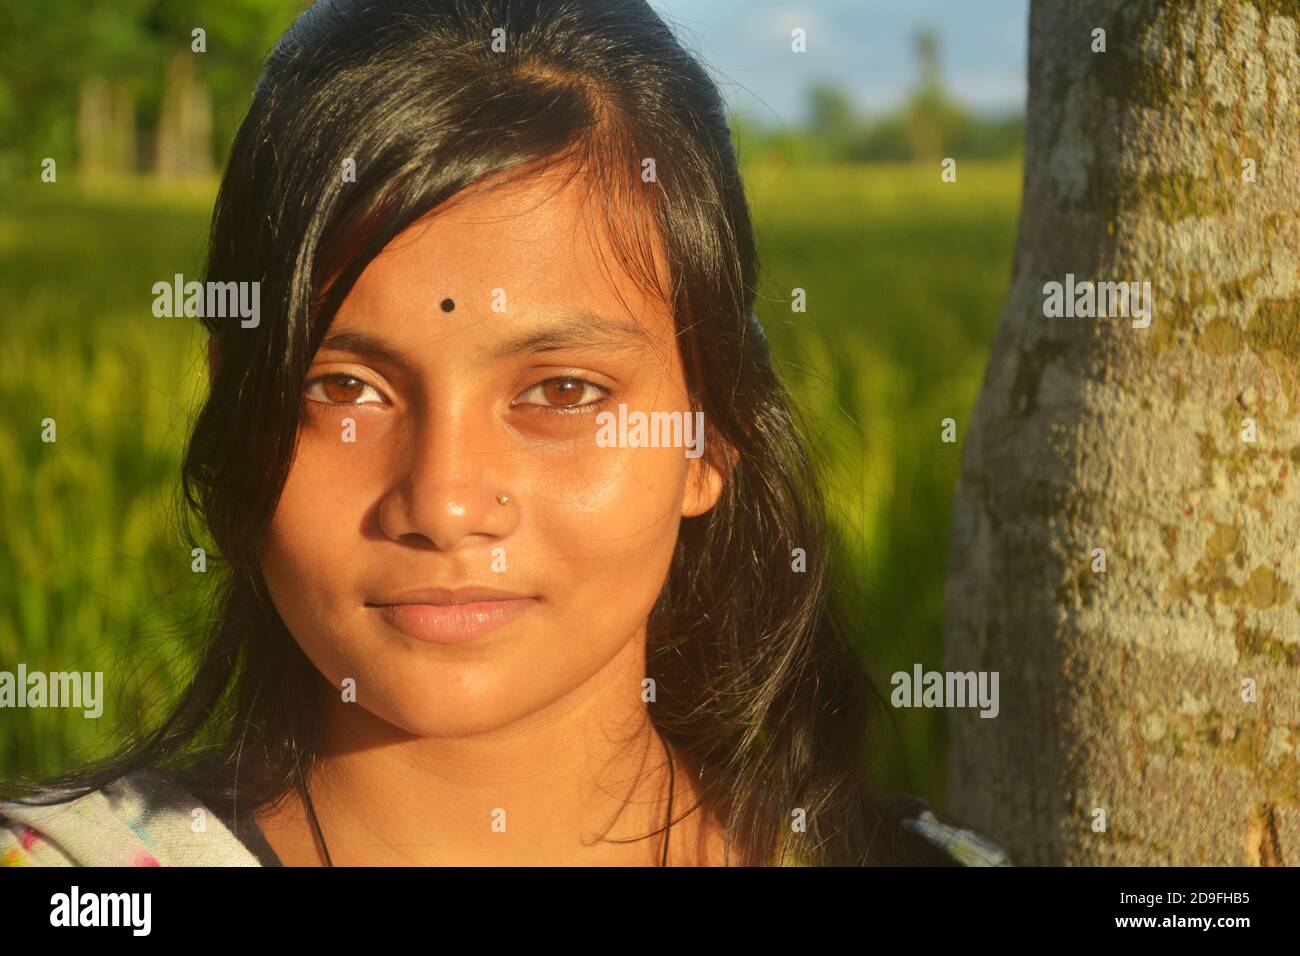 Close up of an Indian teenage girl wearing nose pin bindi on forehead with long dark hairs, selective focusing Stock Photo